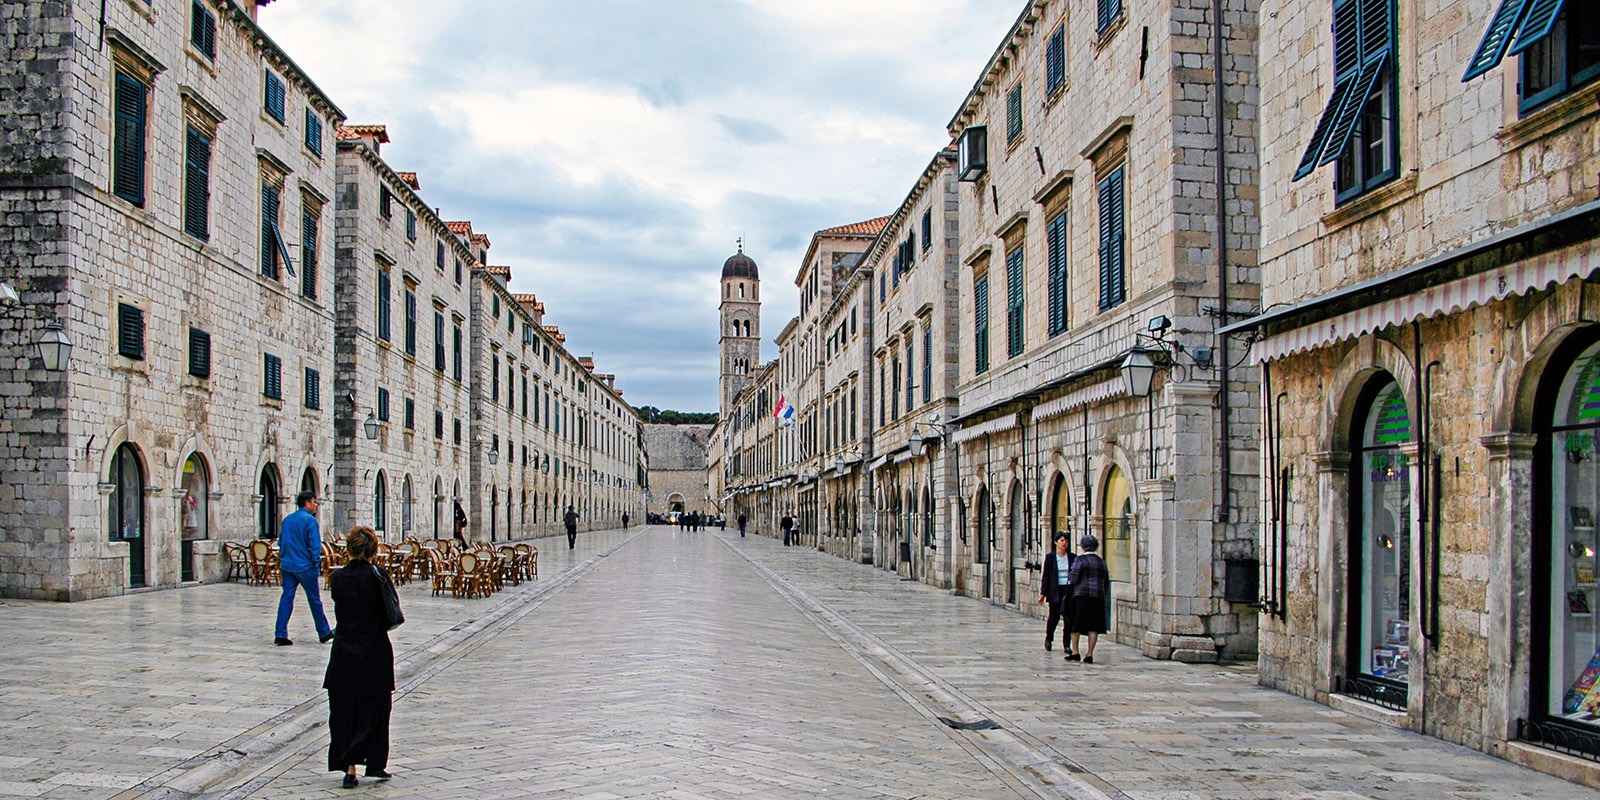 Just before 9 a.m. the main street of Dubrovnik's old town is still pretty empty